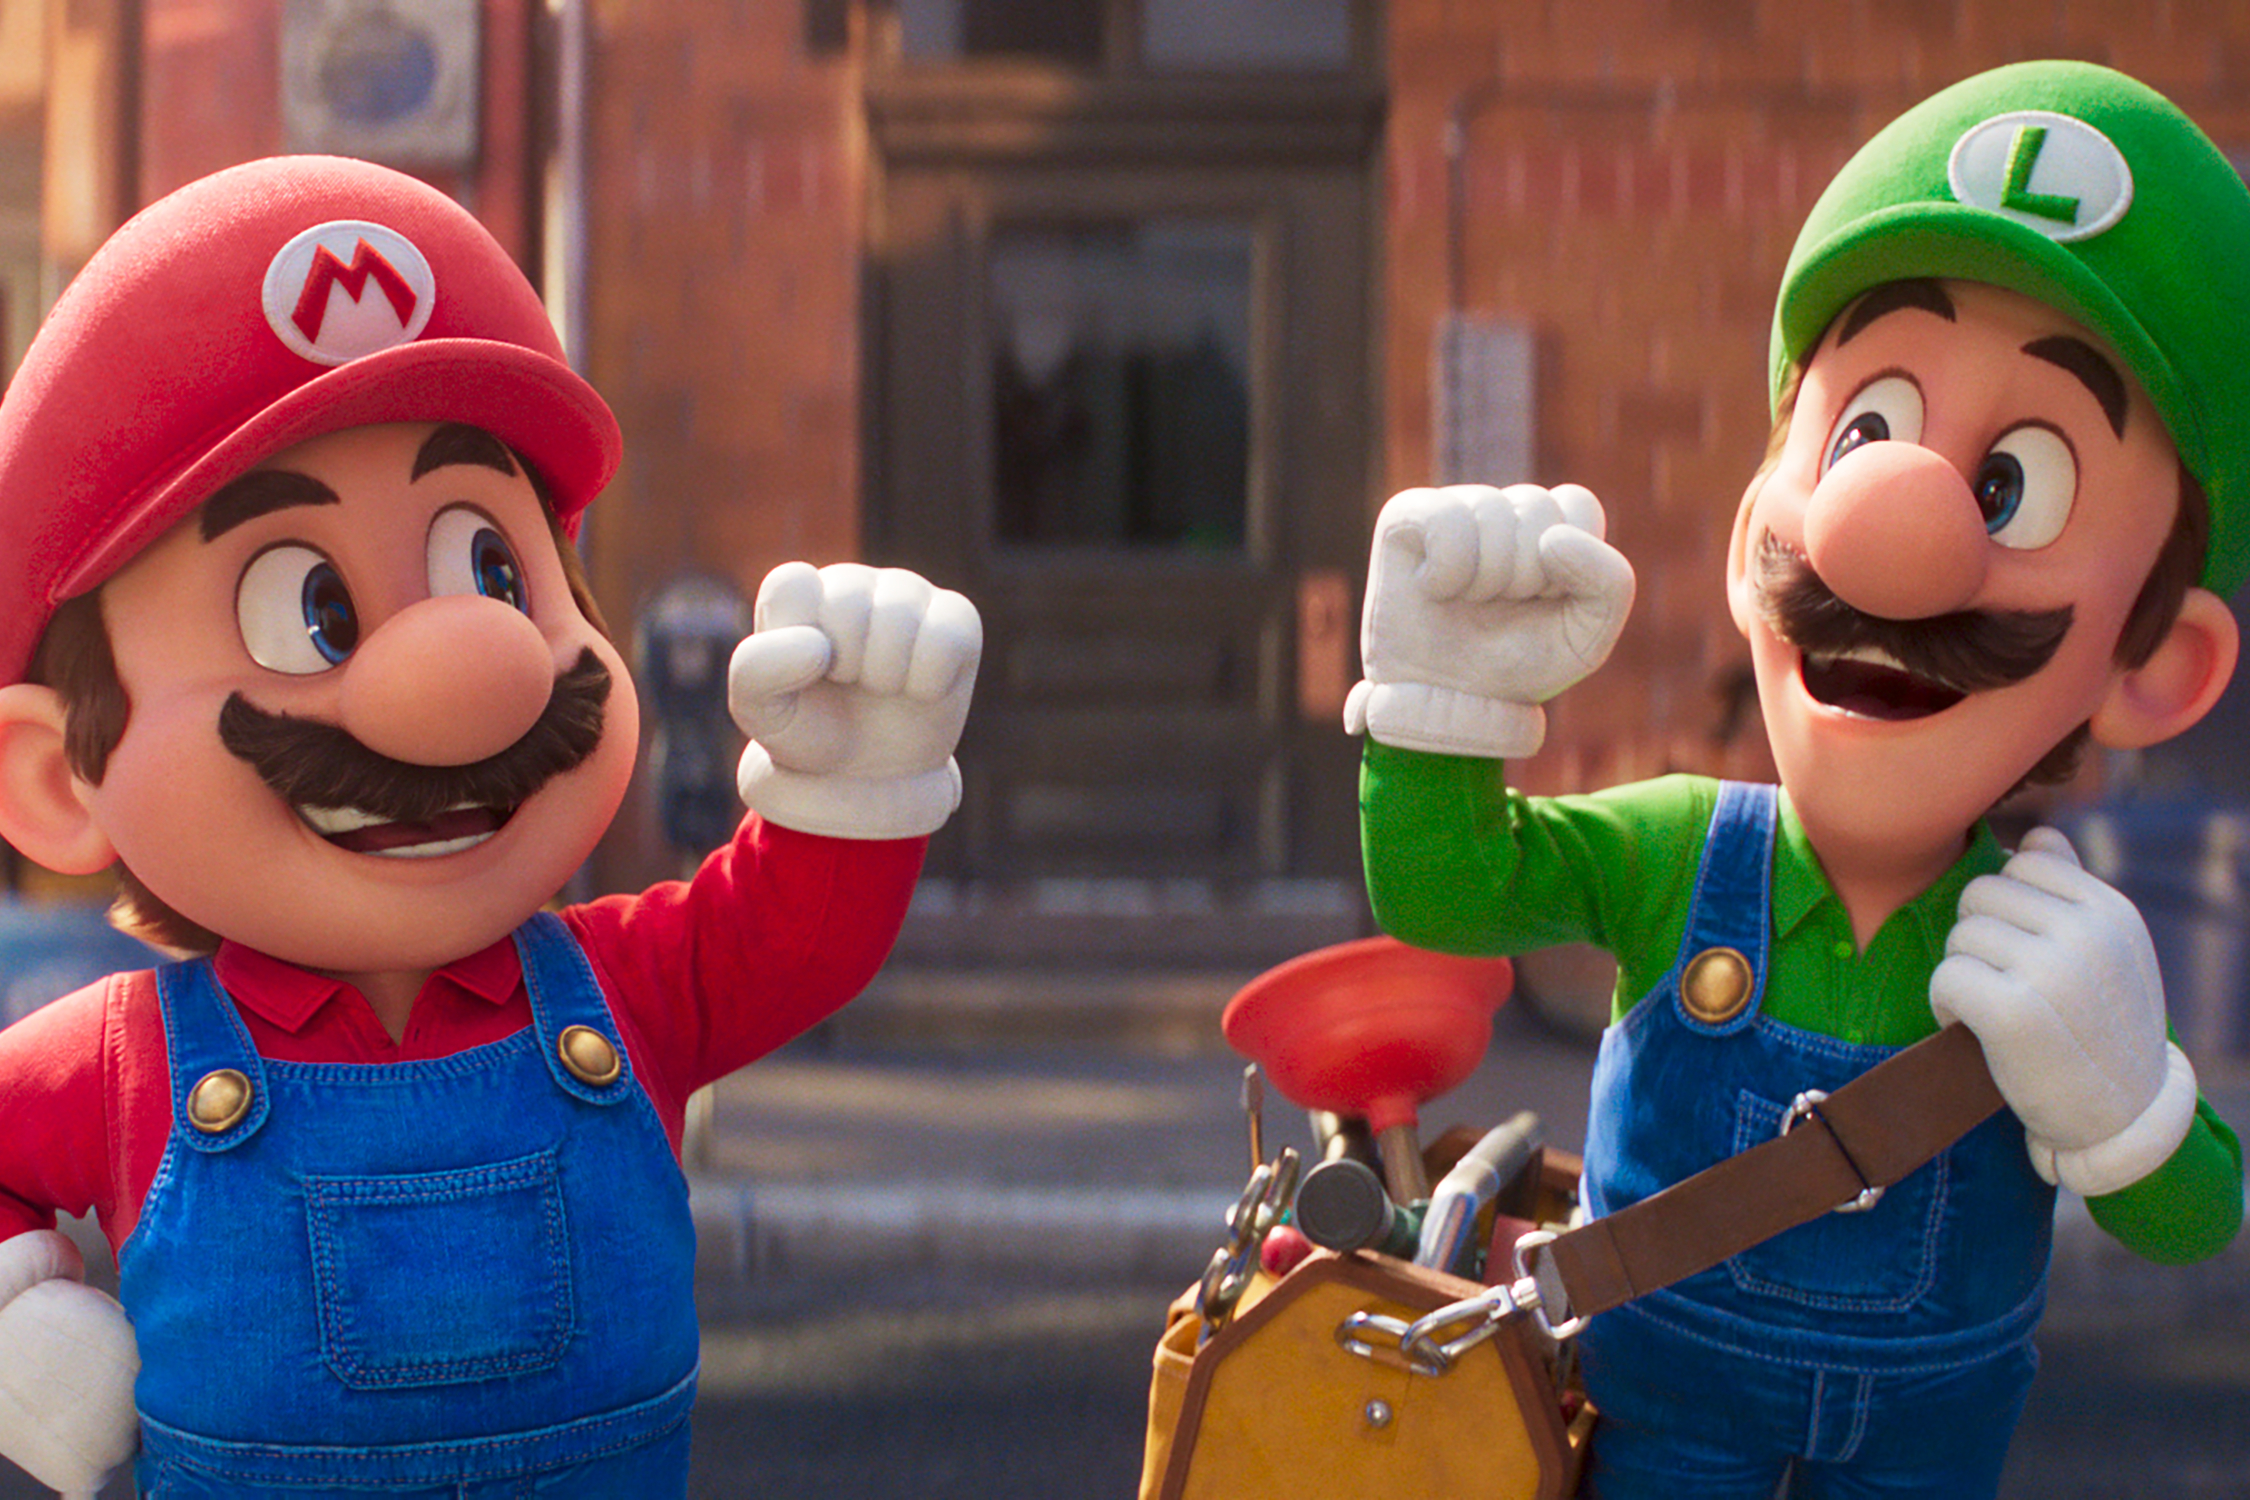 Nintendo moves beyond games with The Super Mario Bros. Movie